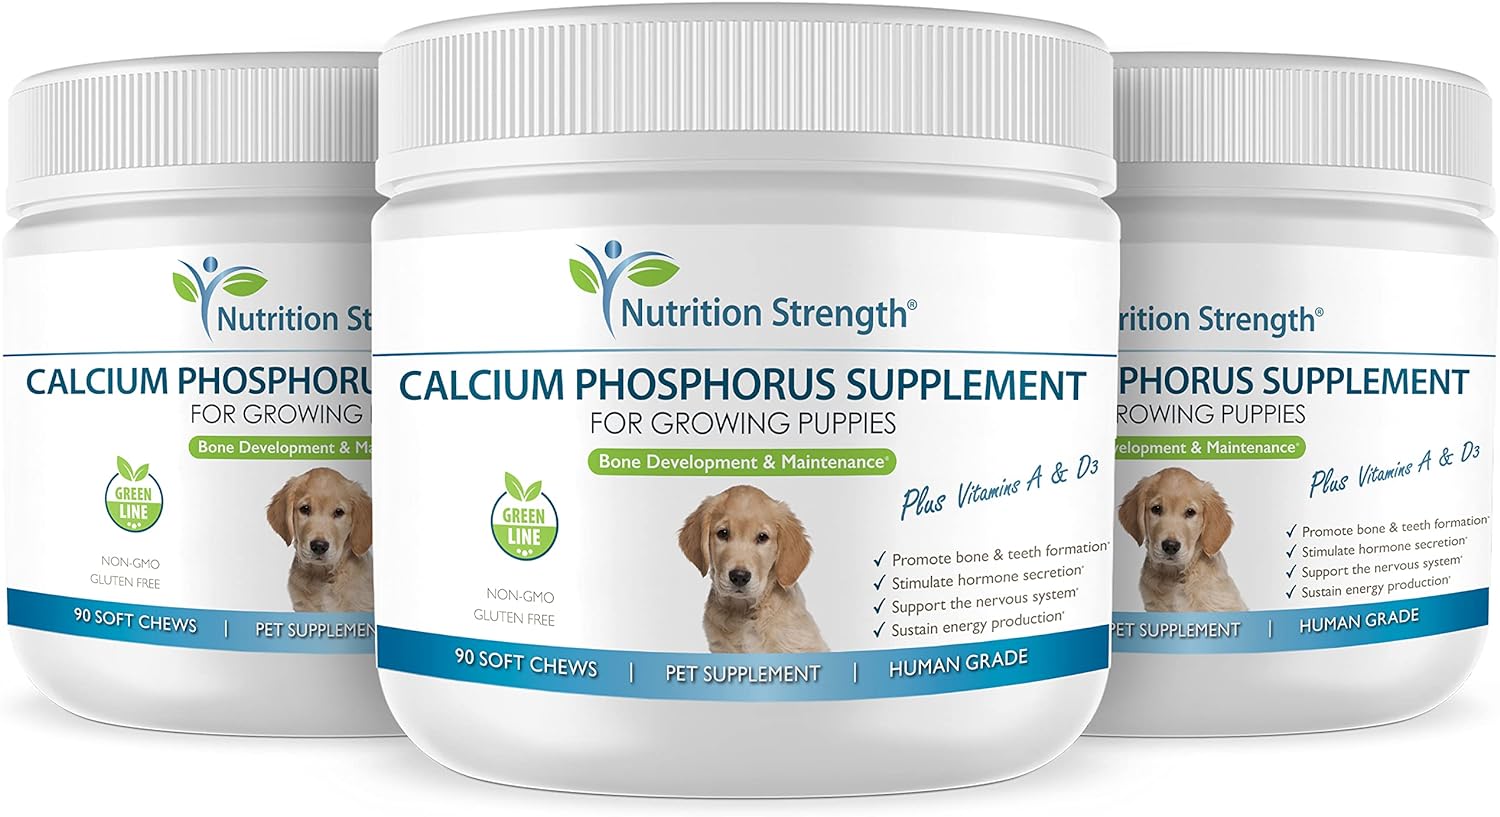 Nutrition Strength Calcium Phosphorus for Dogs Supplement, Provide Calcium for Puppies, Promote Healthy Dog Bones and Puppy Growth Rate, Dog Bone Supplement, 90 Soft Chews : Pet Supplies